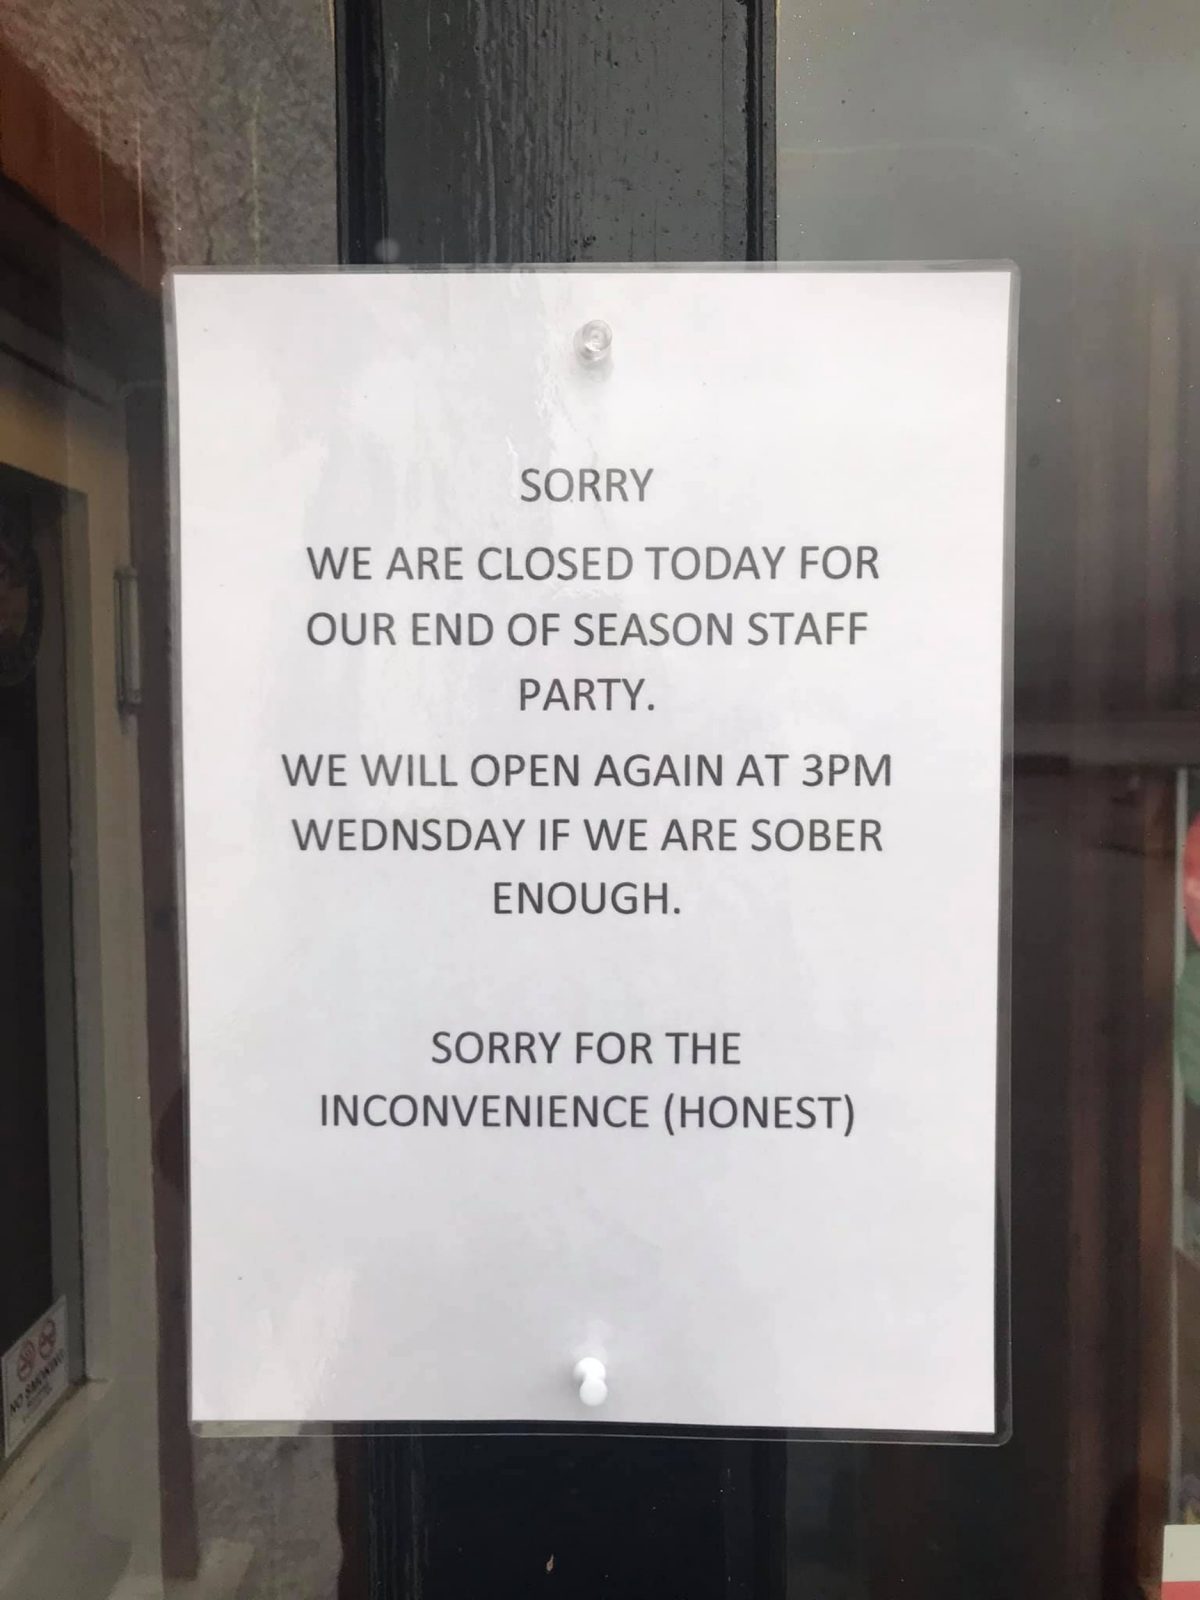 The notice left for customers